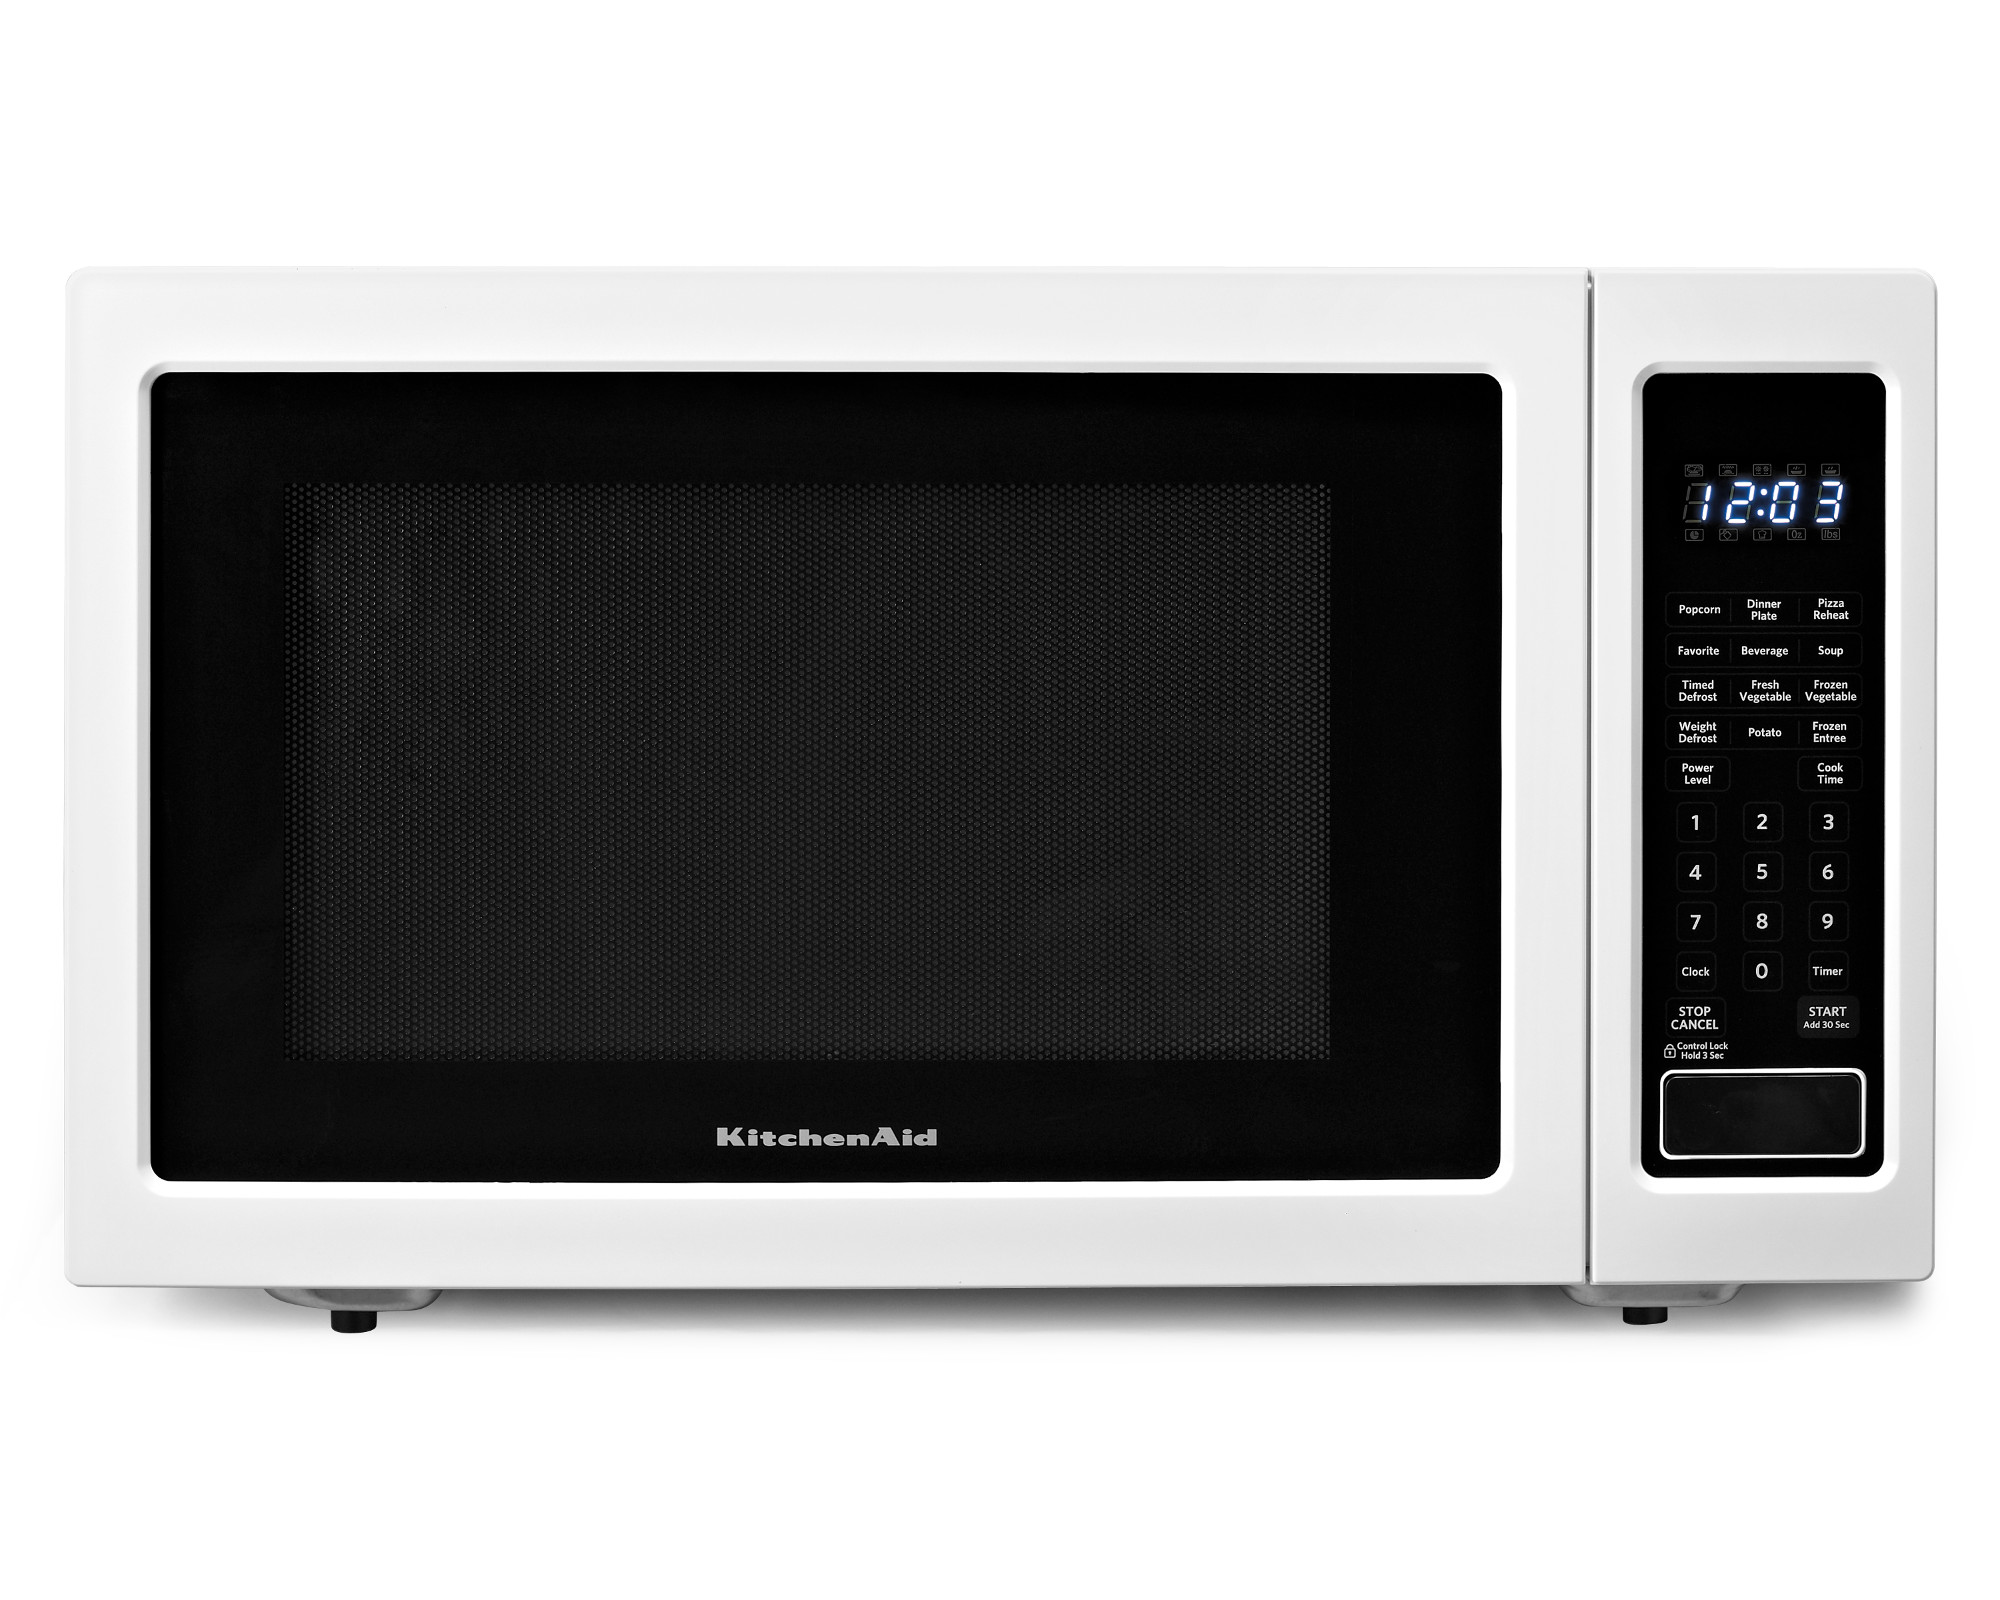 0883049262277 - KCMS1655BWH 1.6 CU. FT. 1,200W COUNTERTOP MICROWAVE OVEN - WHITE